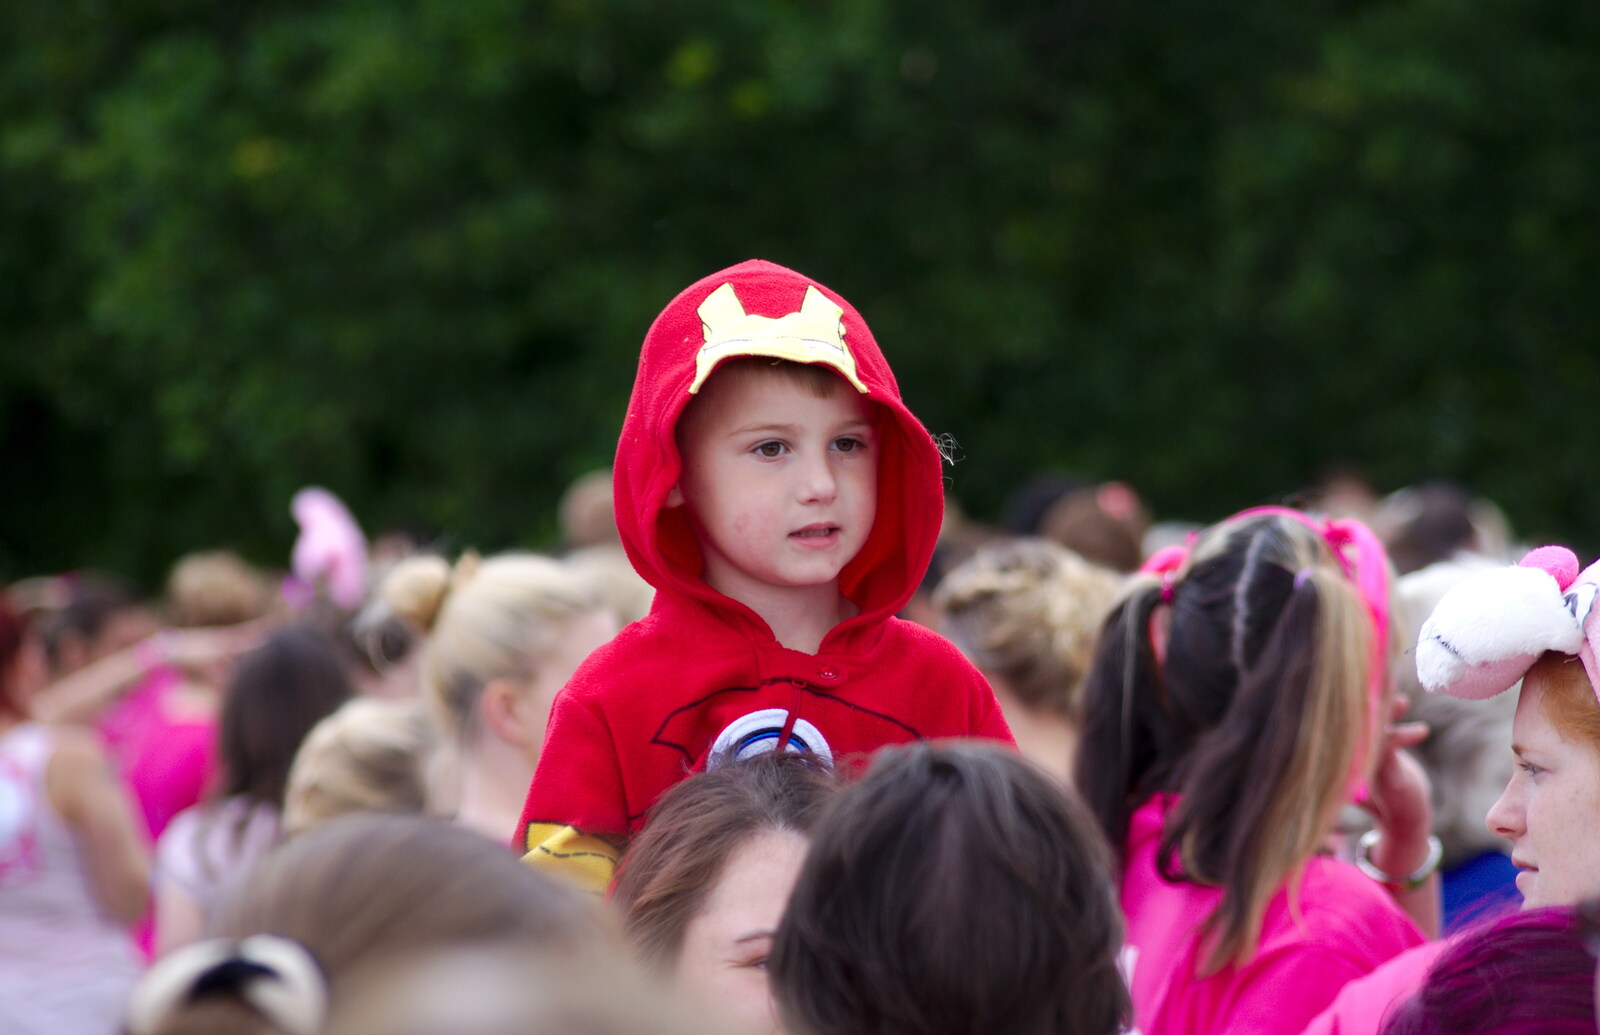 A small boy looks out over the crowd from Isobel's Race For Life, Chantry Park, Ipswich - 11th June 2014